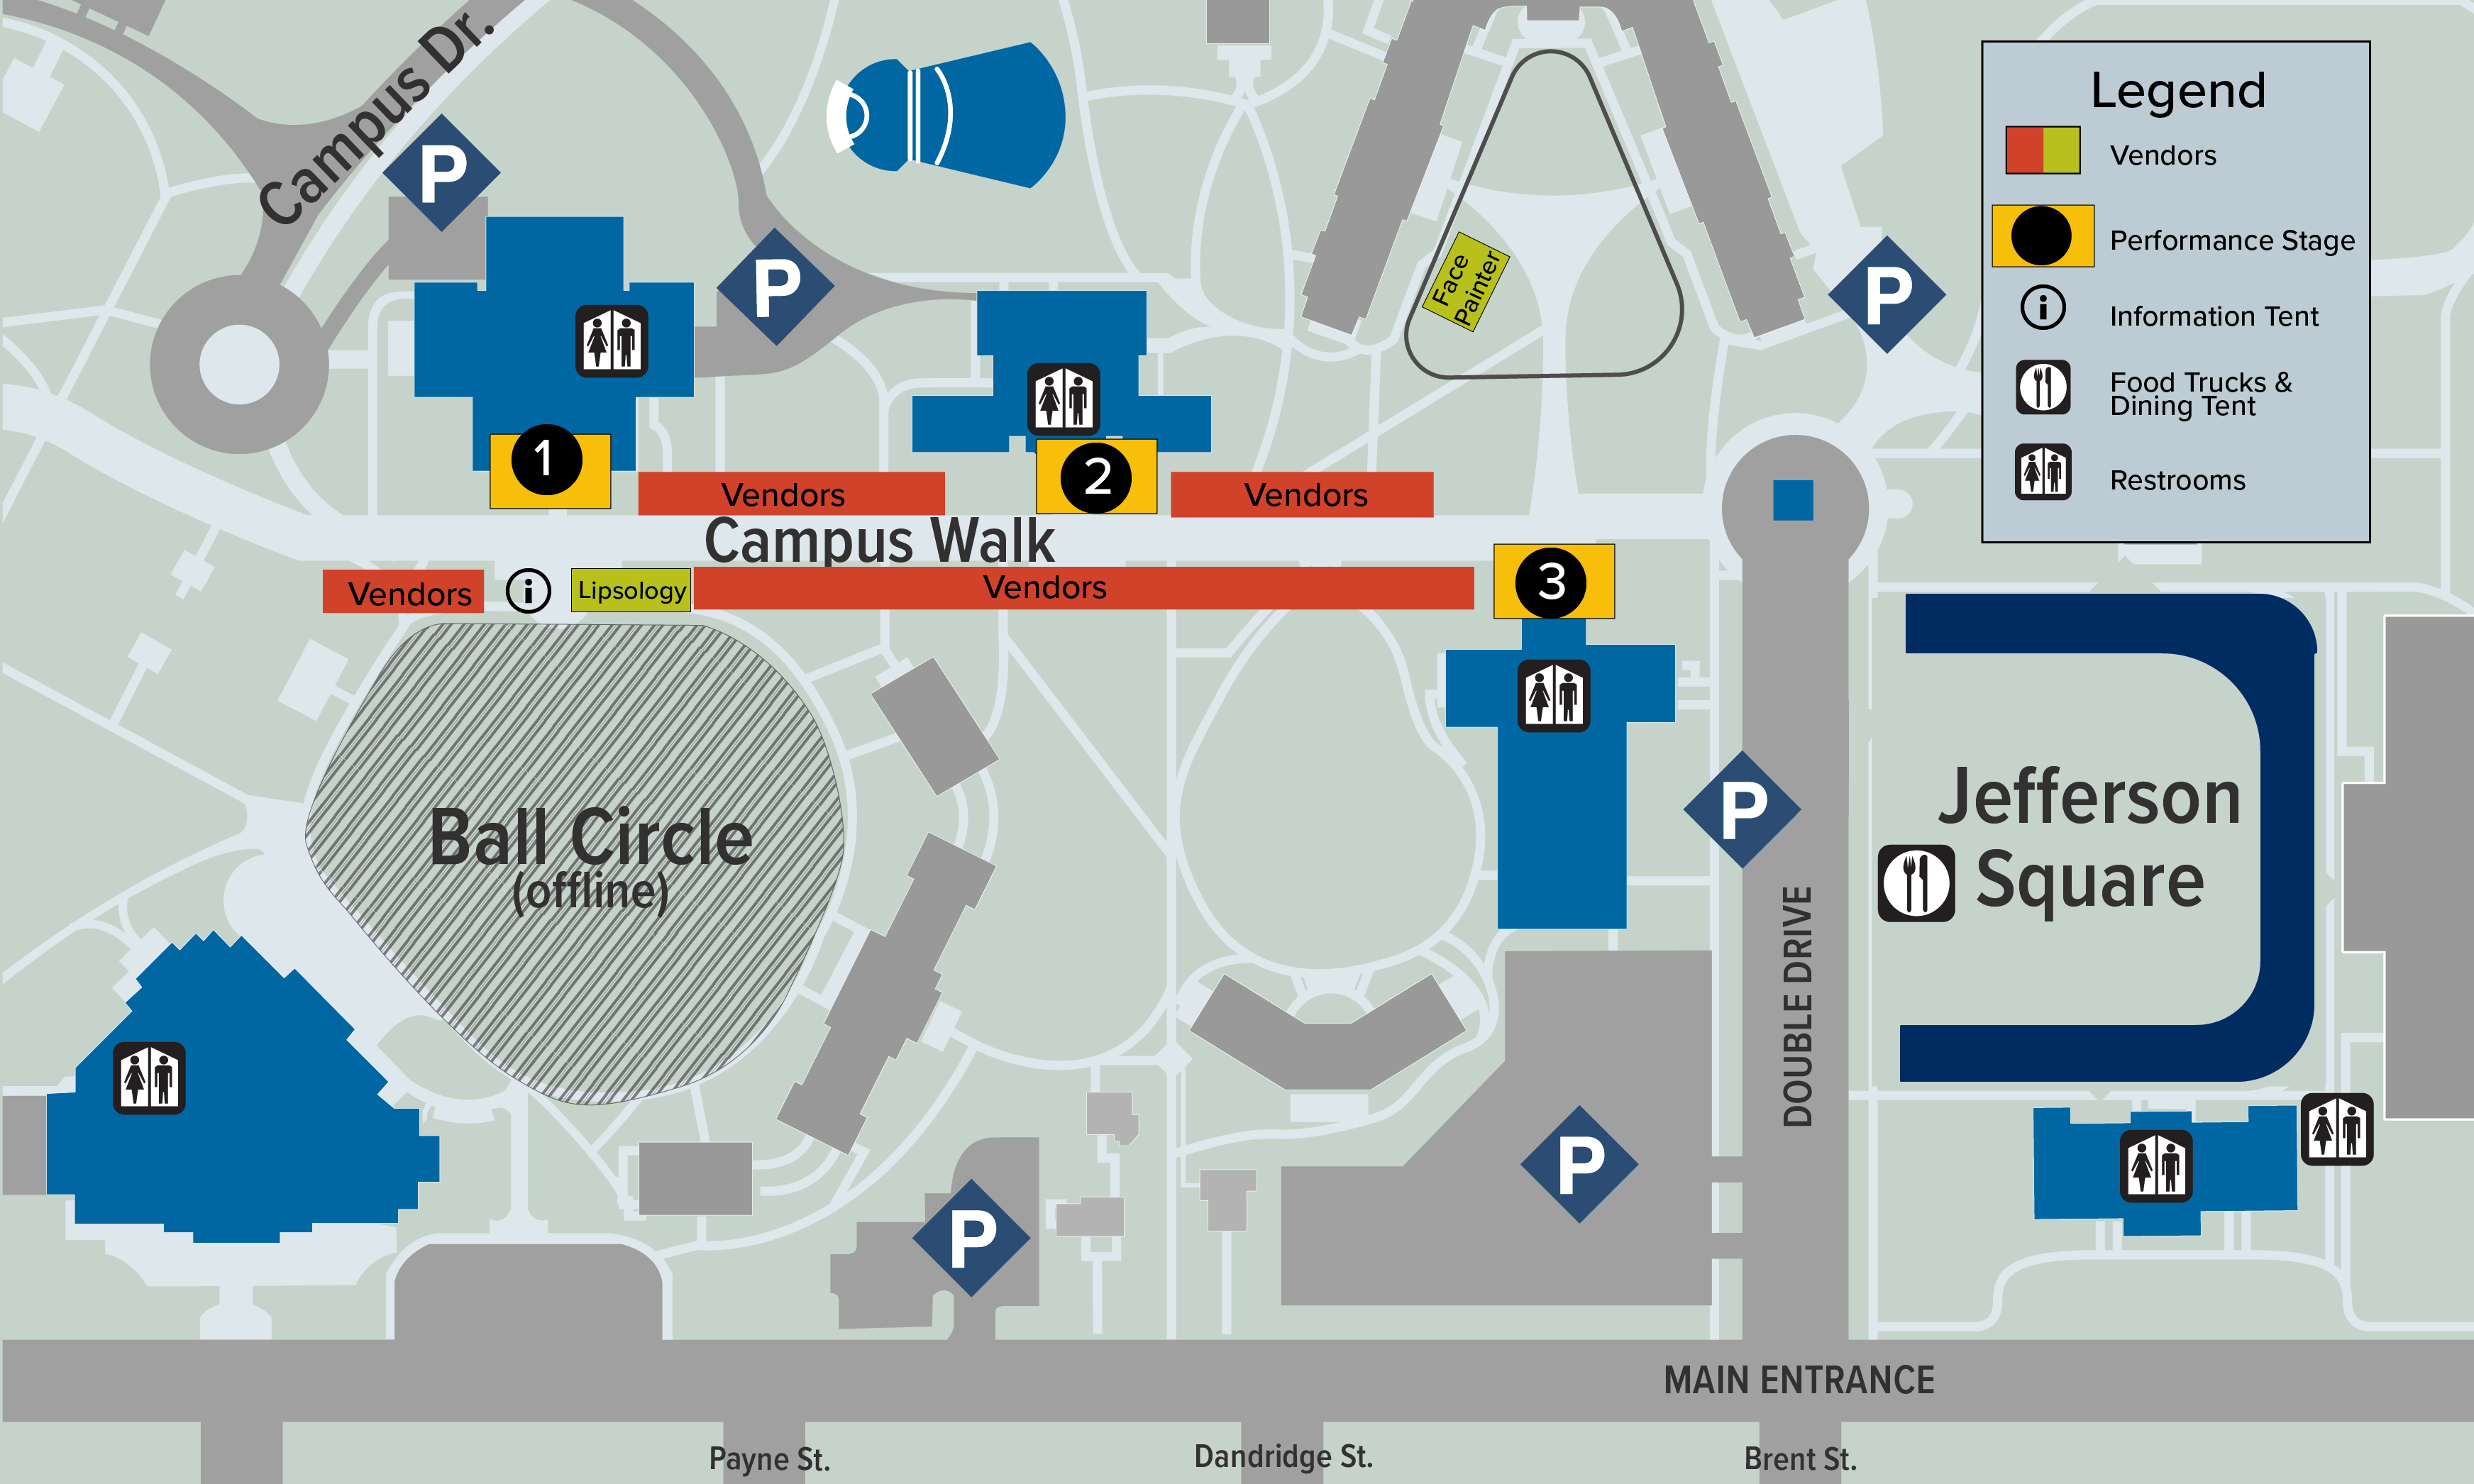 A map of UMW Fredericksburg Campus with Multicultural Fair locations marked. For accessible map, please visit https://www.umw.edu/visitors/. For Multicultural Fair information, contact jfmc@mail.umw.edu or stop by the Information Table located at Campus Walk near Lee Hall (Rain location: 2nd floor of the Cedric Rucker University Center, Front desk) on the day of the Multicultural Fair